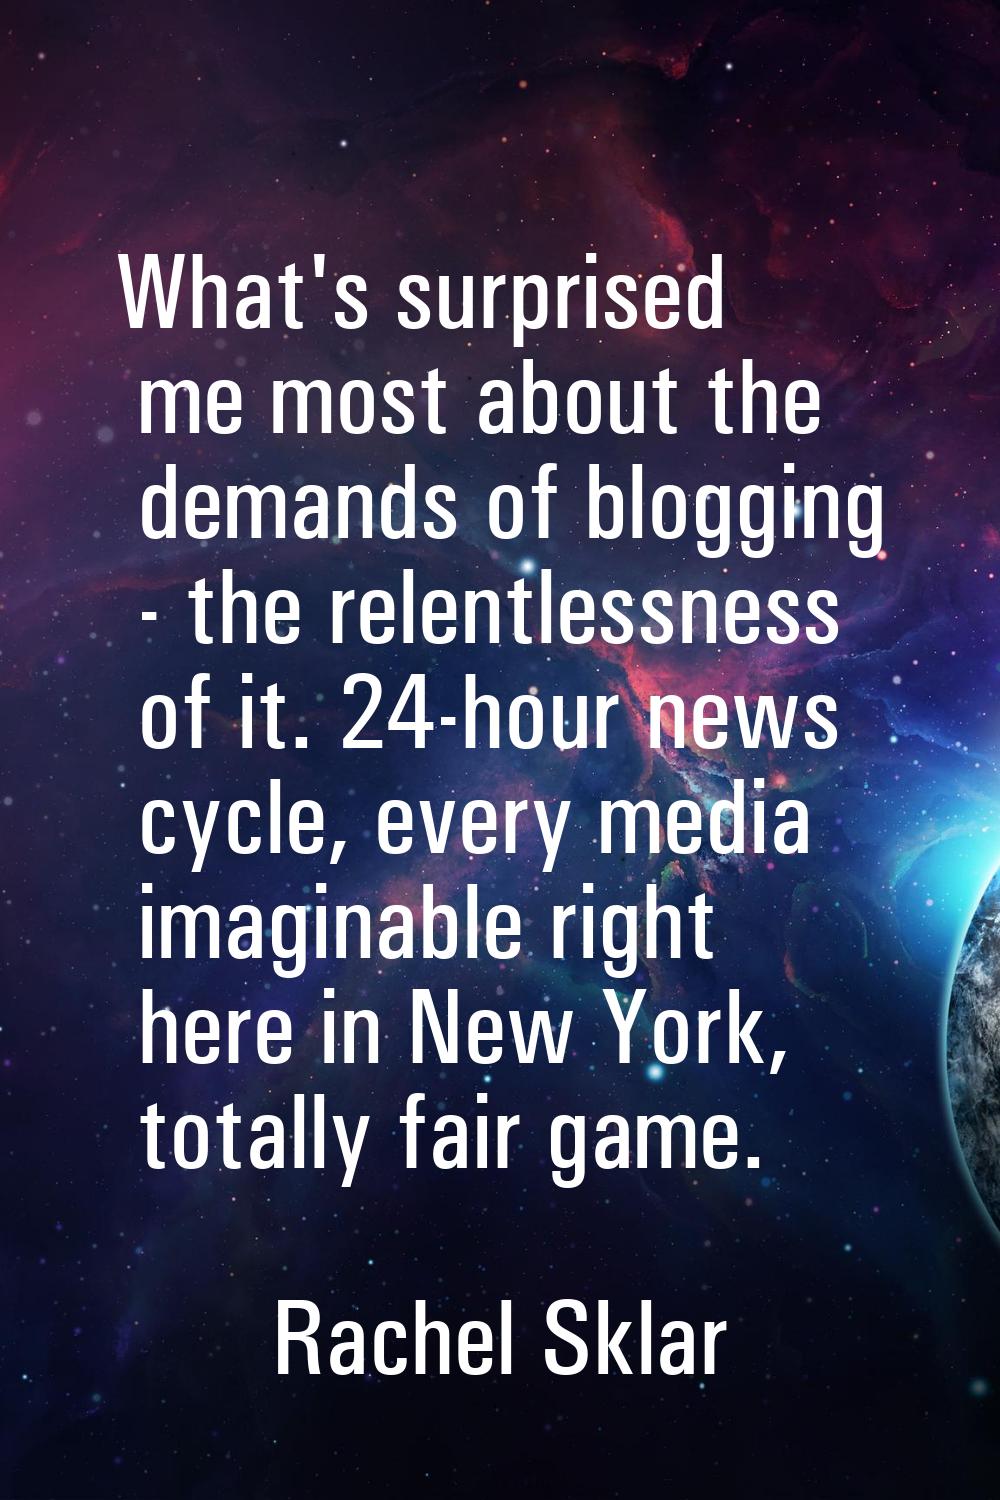 What's surprised me most about the demands of blogging - the relentlessness of it. 24-hour news cyc